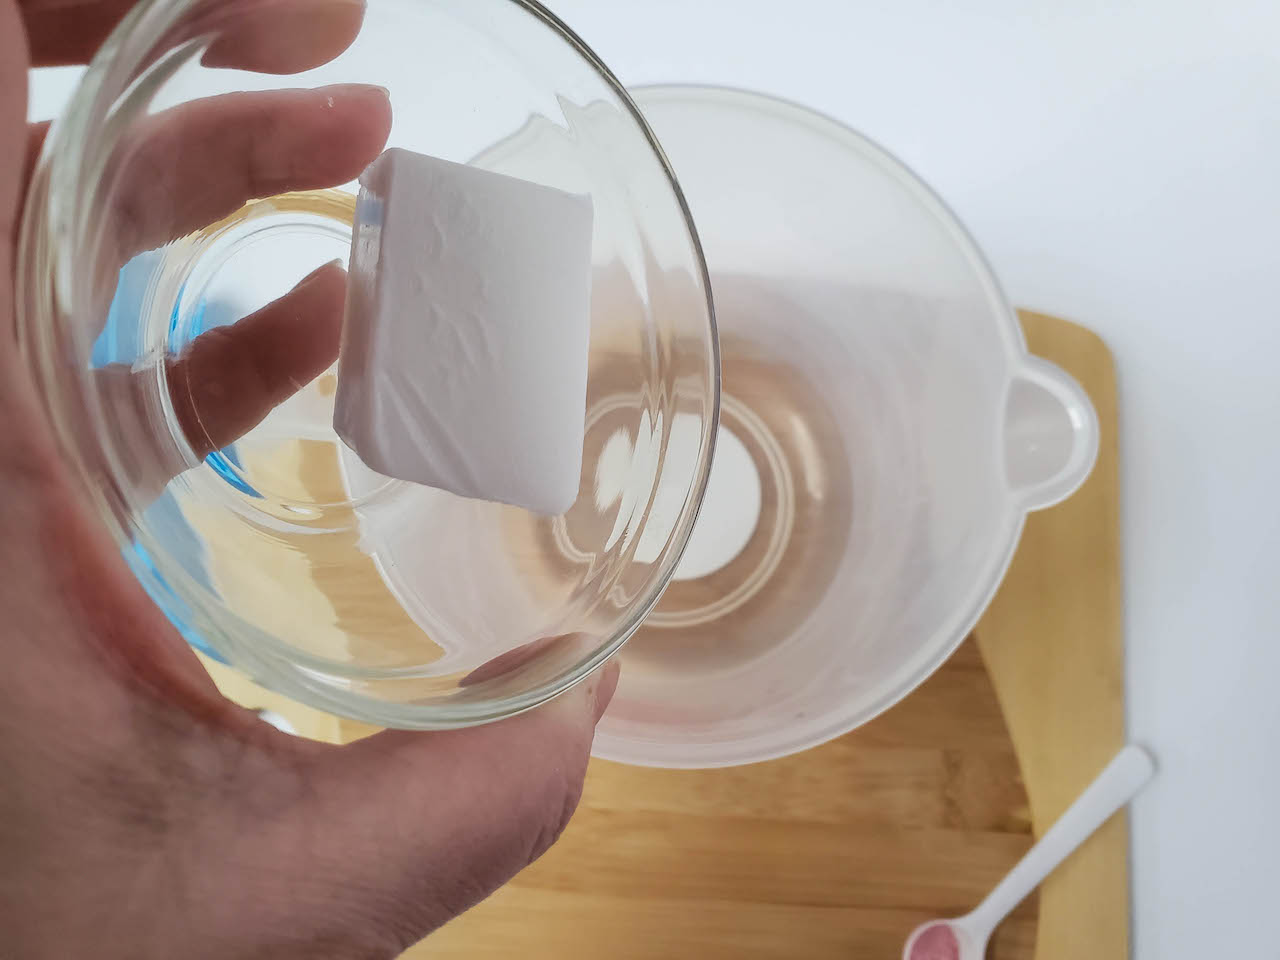 soap base being placed in a measuring cup